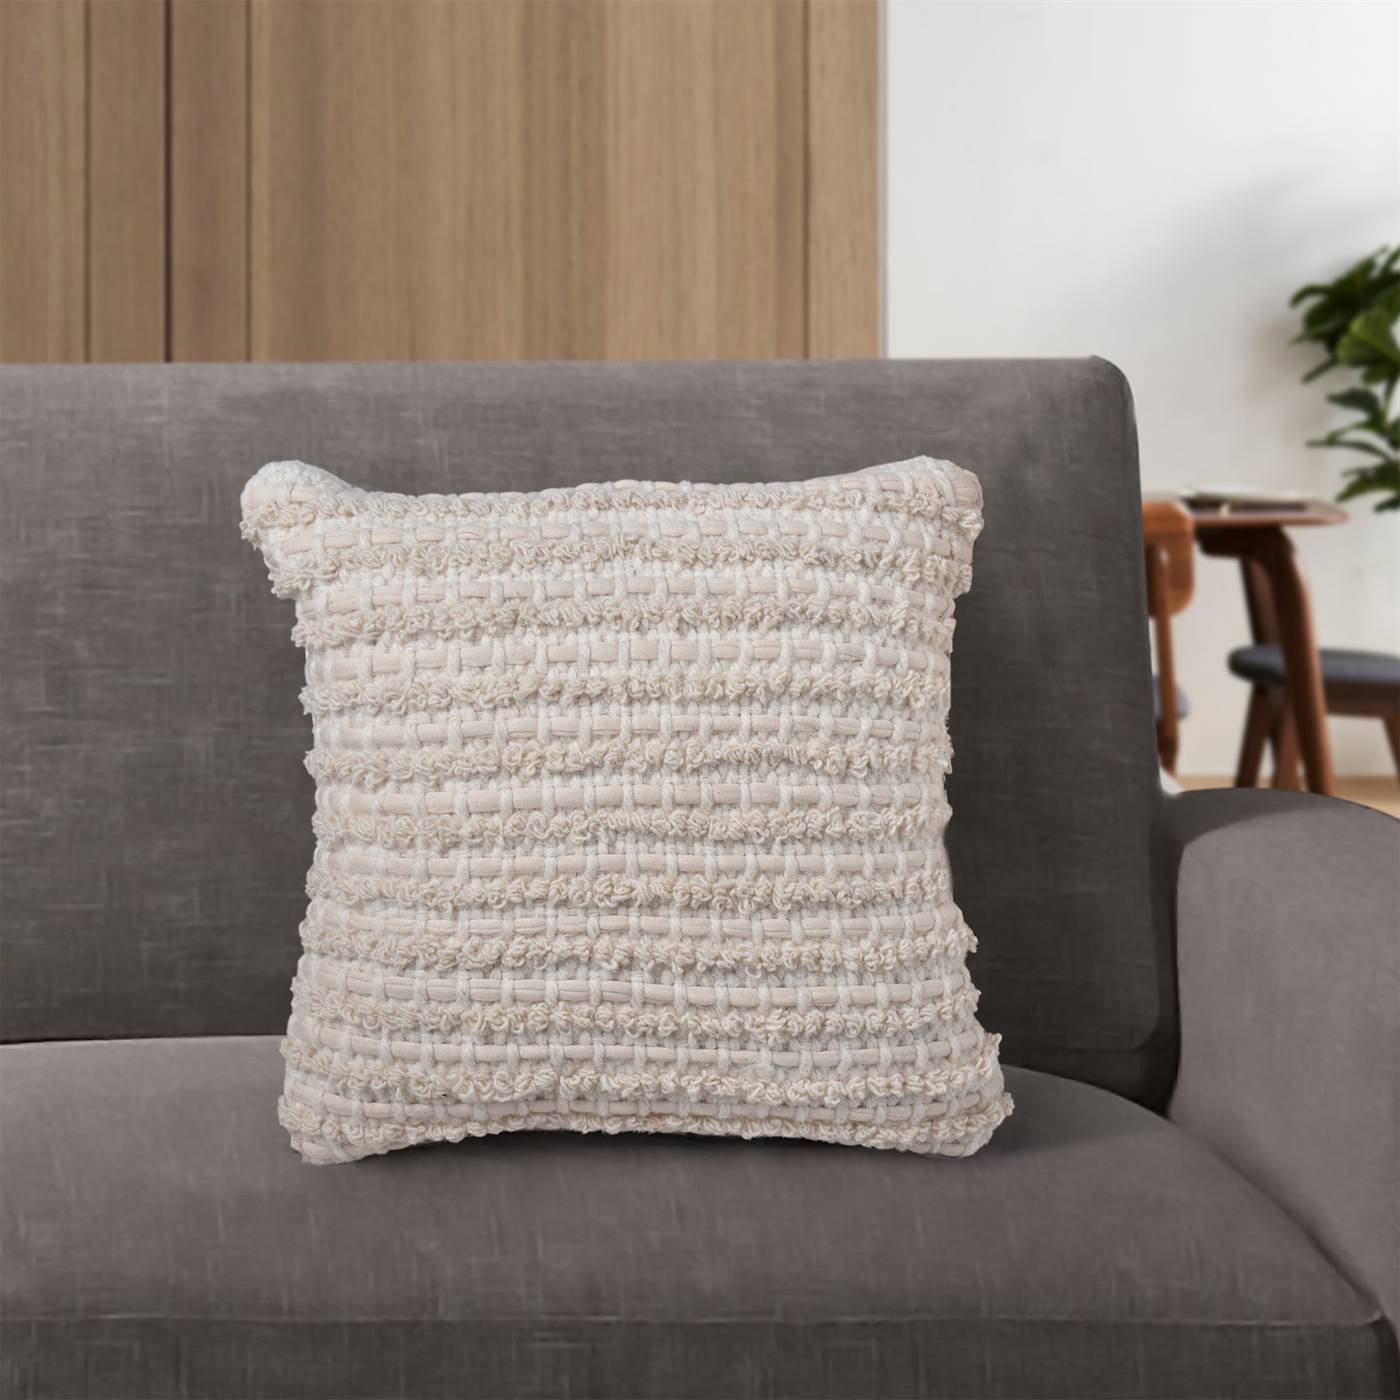 Adonis Cushion, 45x45 cm, Natural White, Wool, Cotton, Hand Woven, Pitloom, All Loop